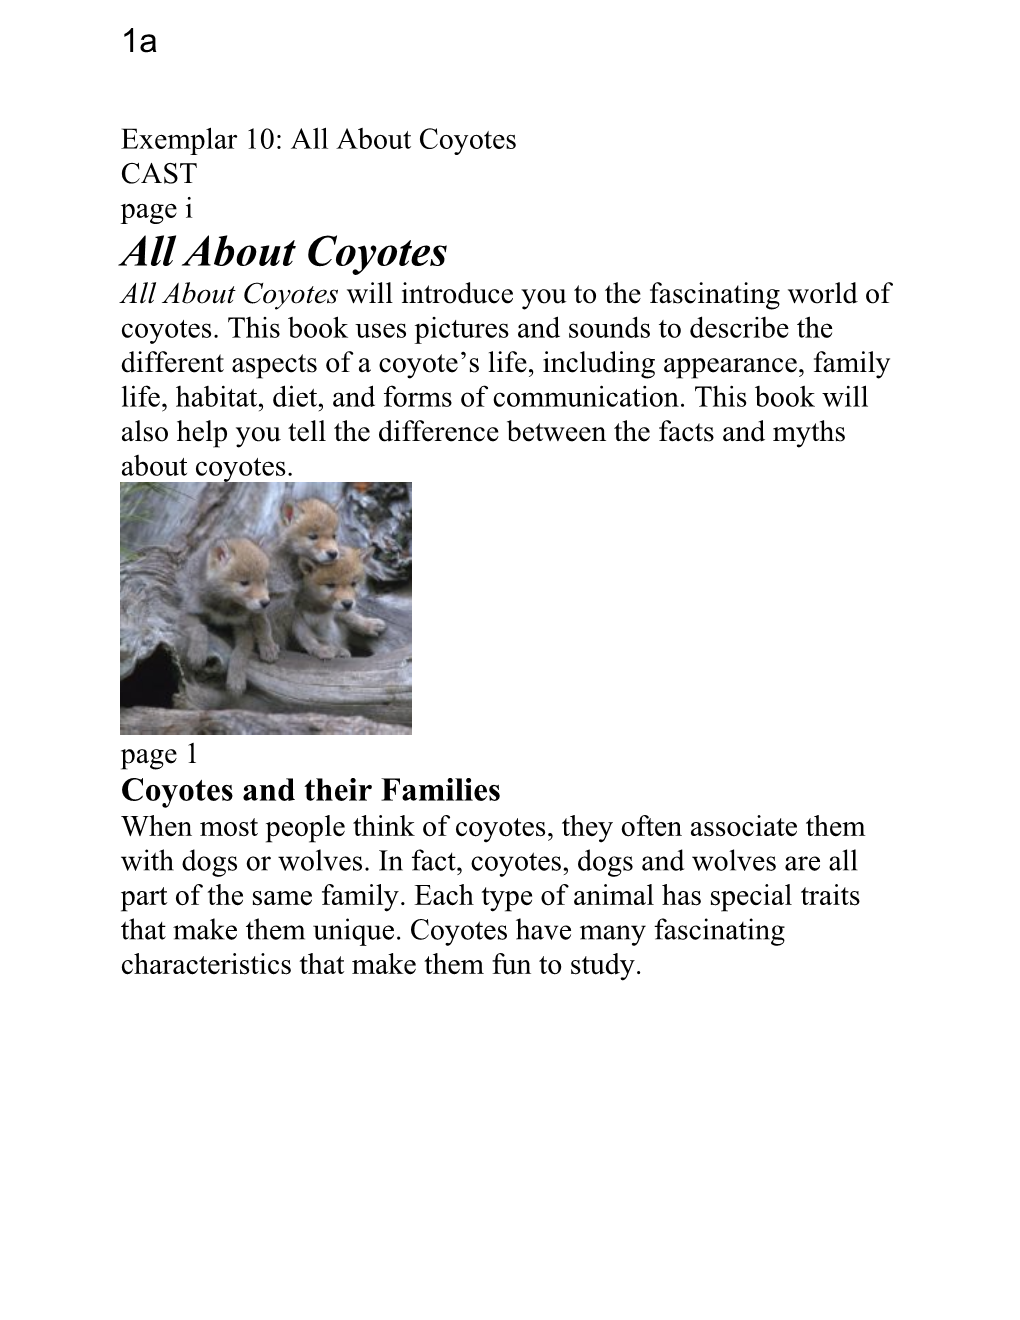 Exemplar 10: All About Coyotes